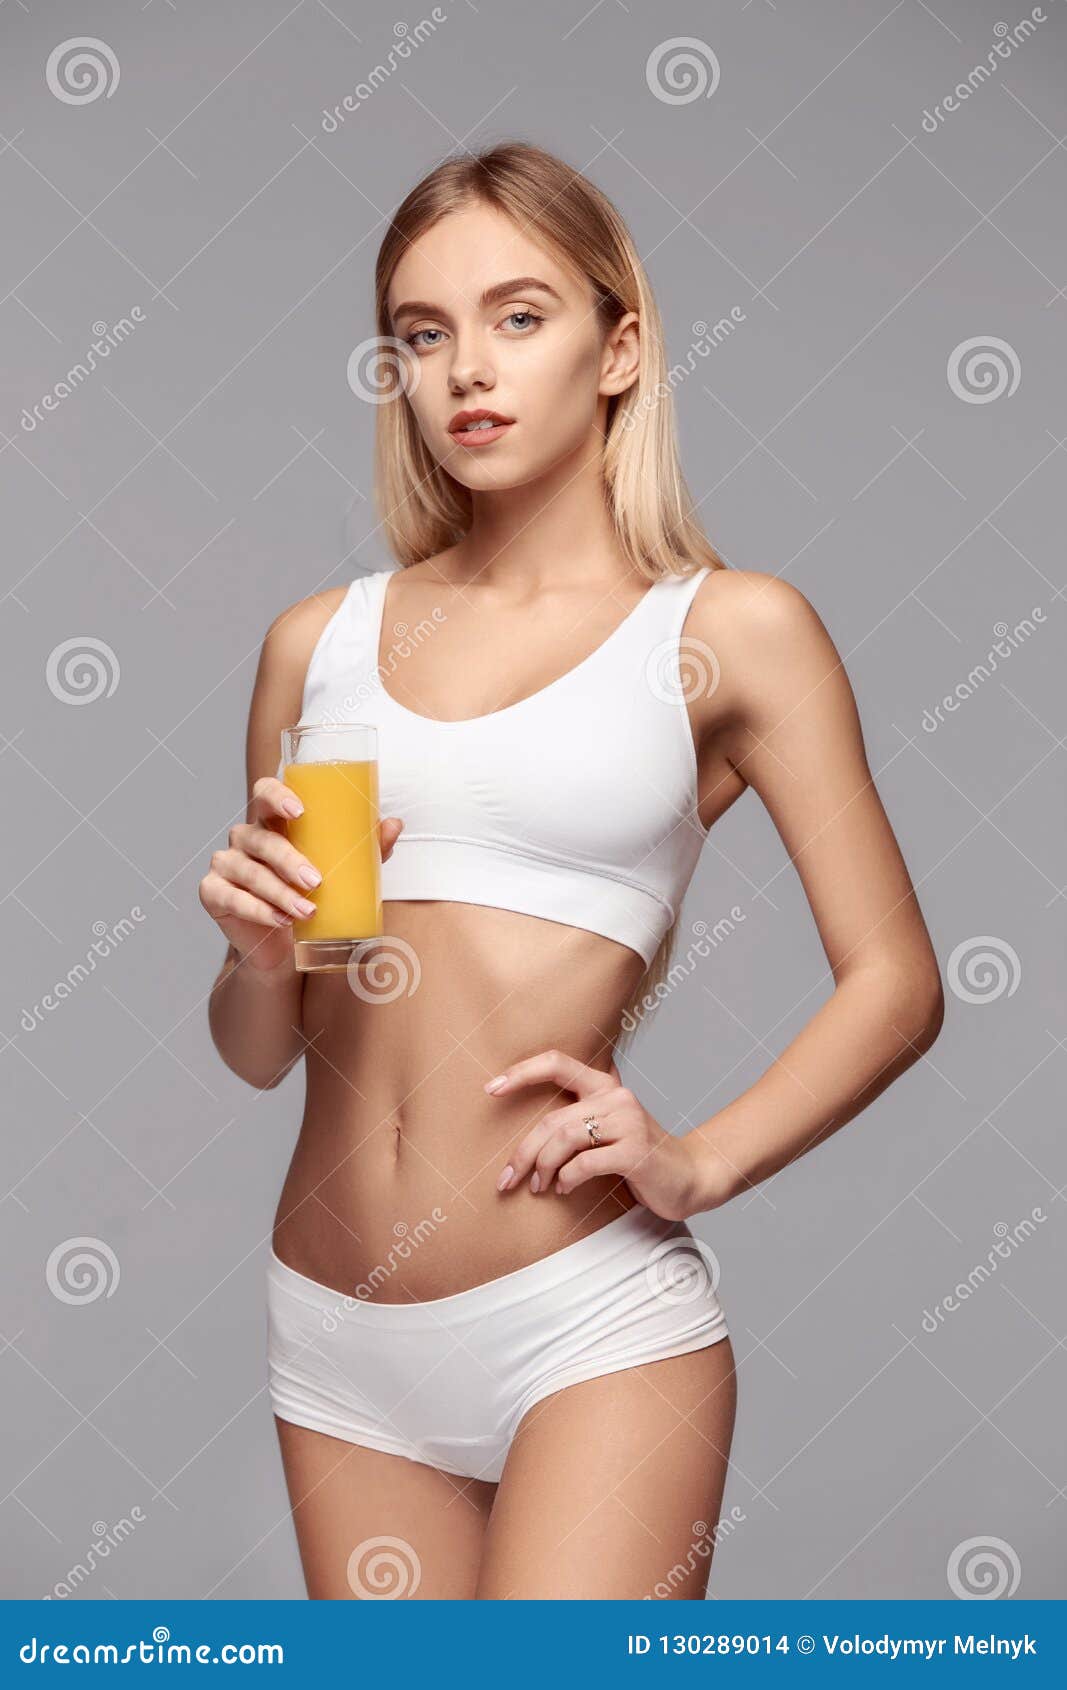 Perfect Slim Toned Young Body of the Girl . Stock Photo - Image of